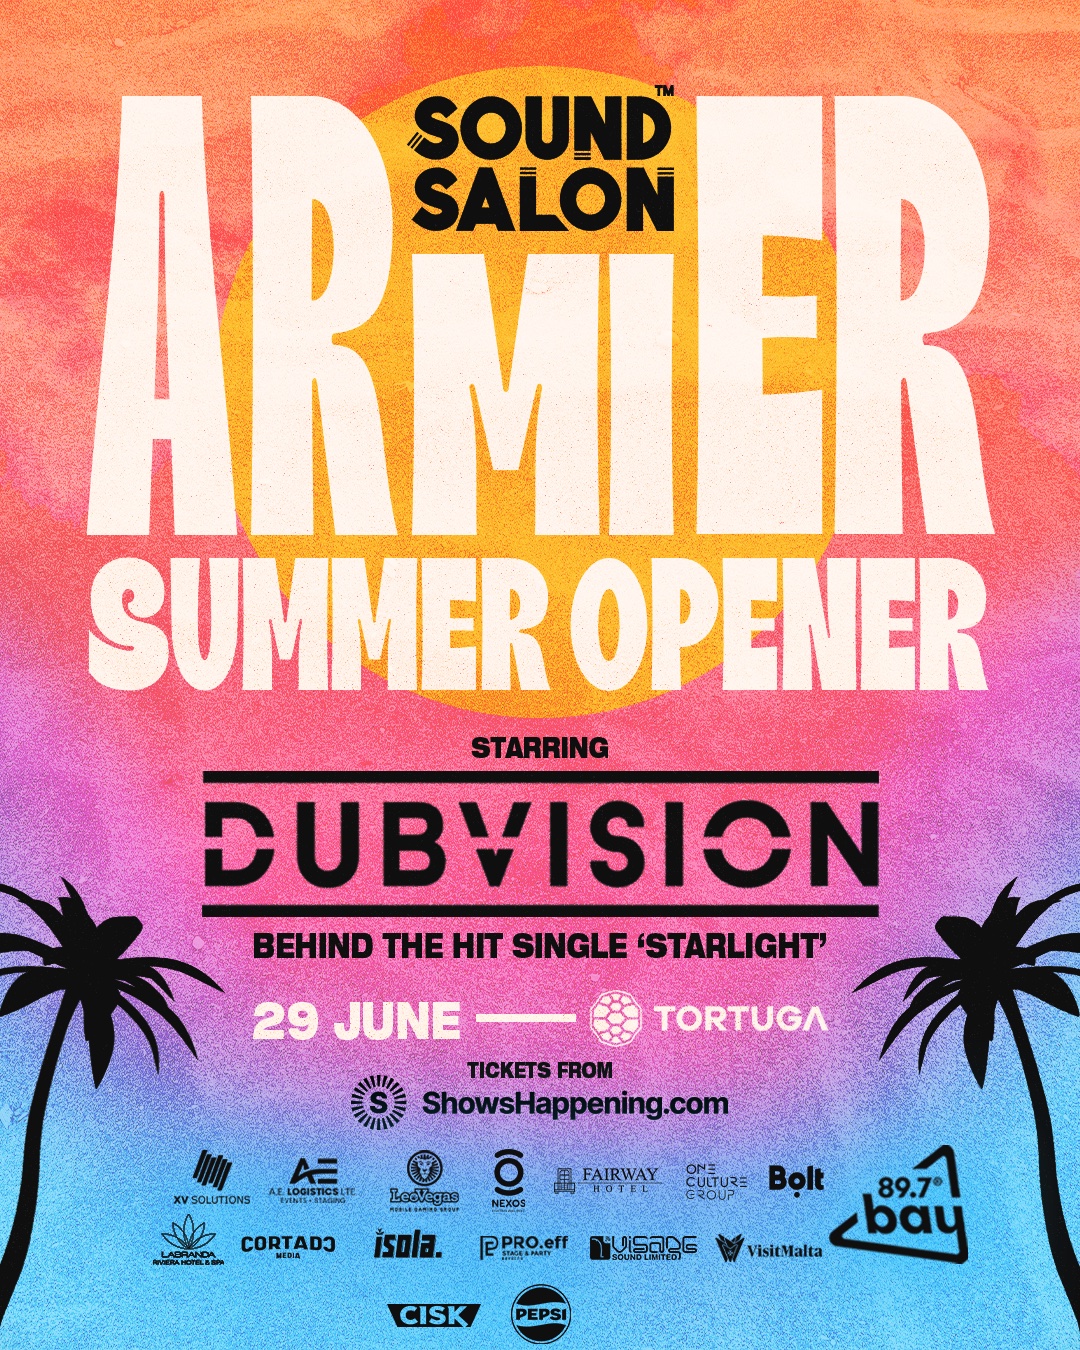 The Sound Salon Summer Opener Ft. Dubvision poster